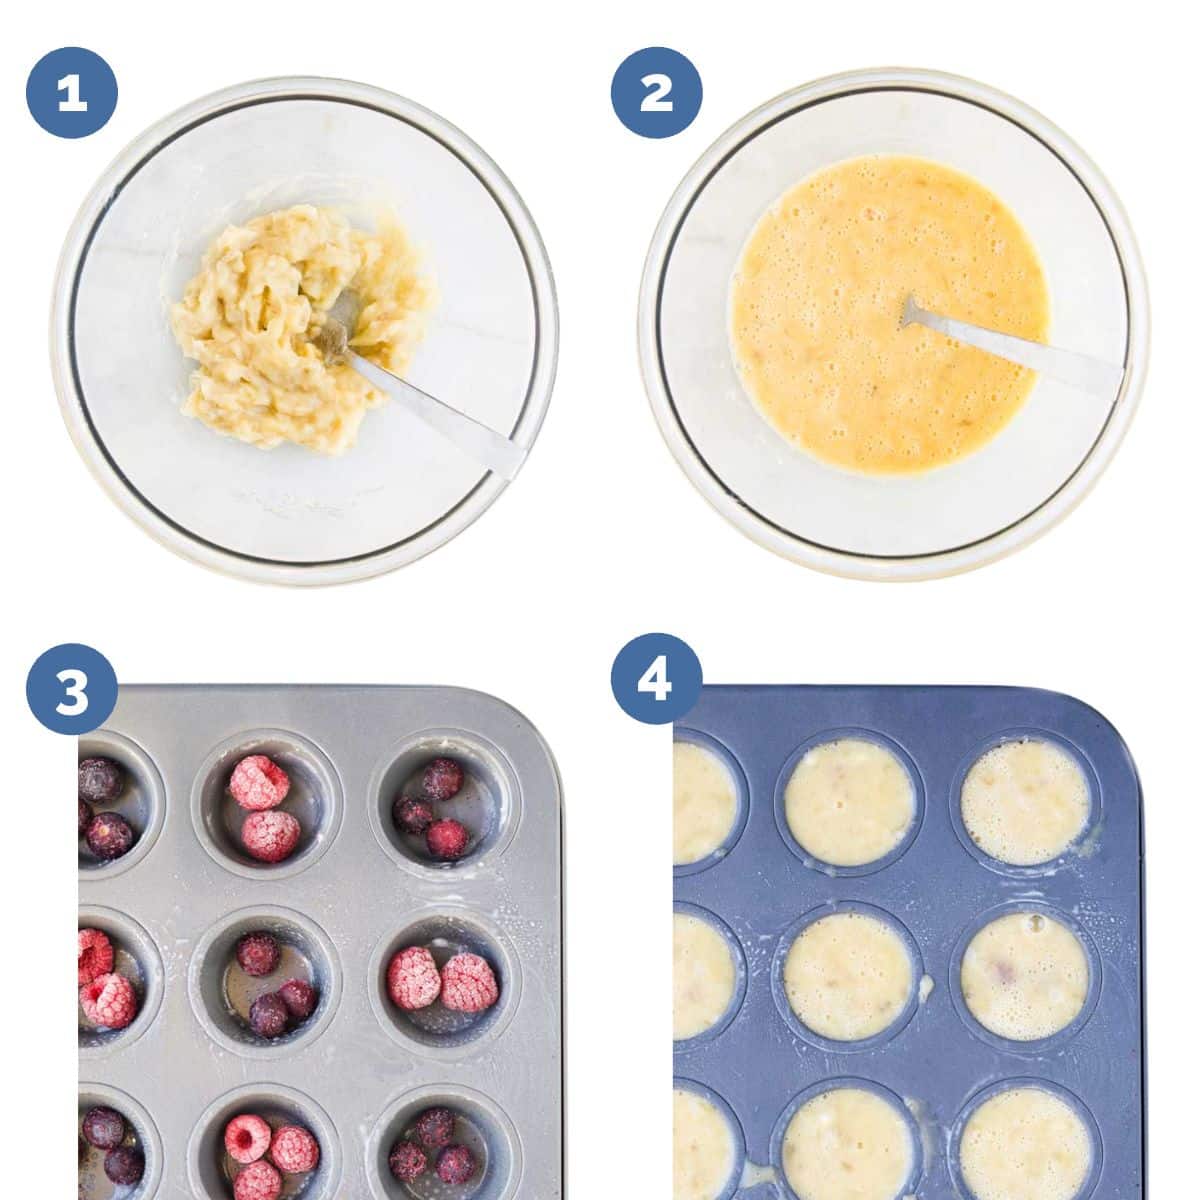 Collage of 4 Images Showing How to Make Banana Egg Muffins. 1. Banana Mashed in Bowl. 2. Banana and Egg Mixed Together 3. Frozen Berries in Bottom of Muffin Tray Sections 4. Muffin Tray Filled with Egg Mixture. 